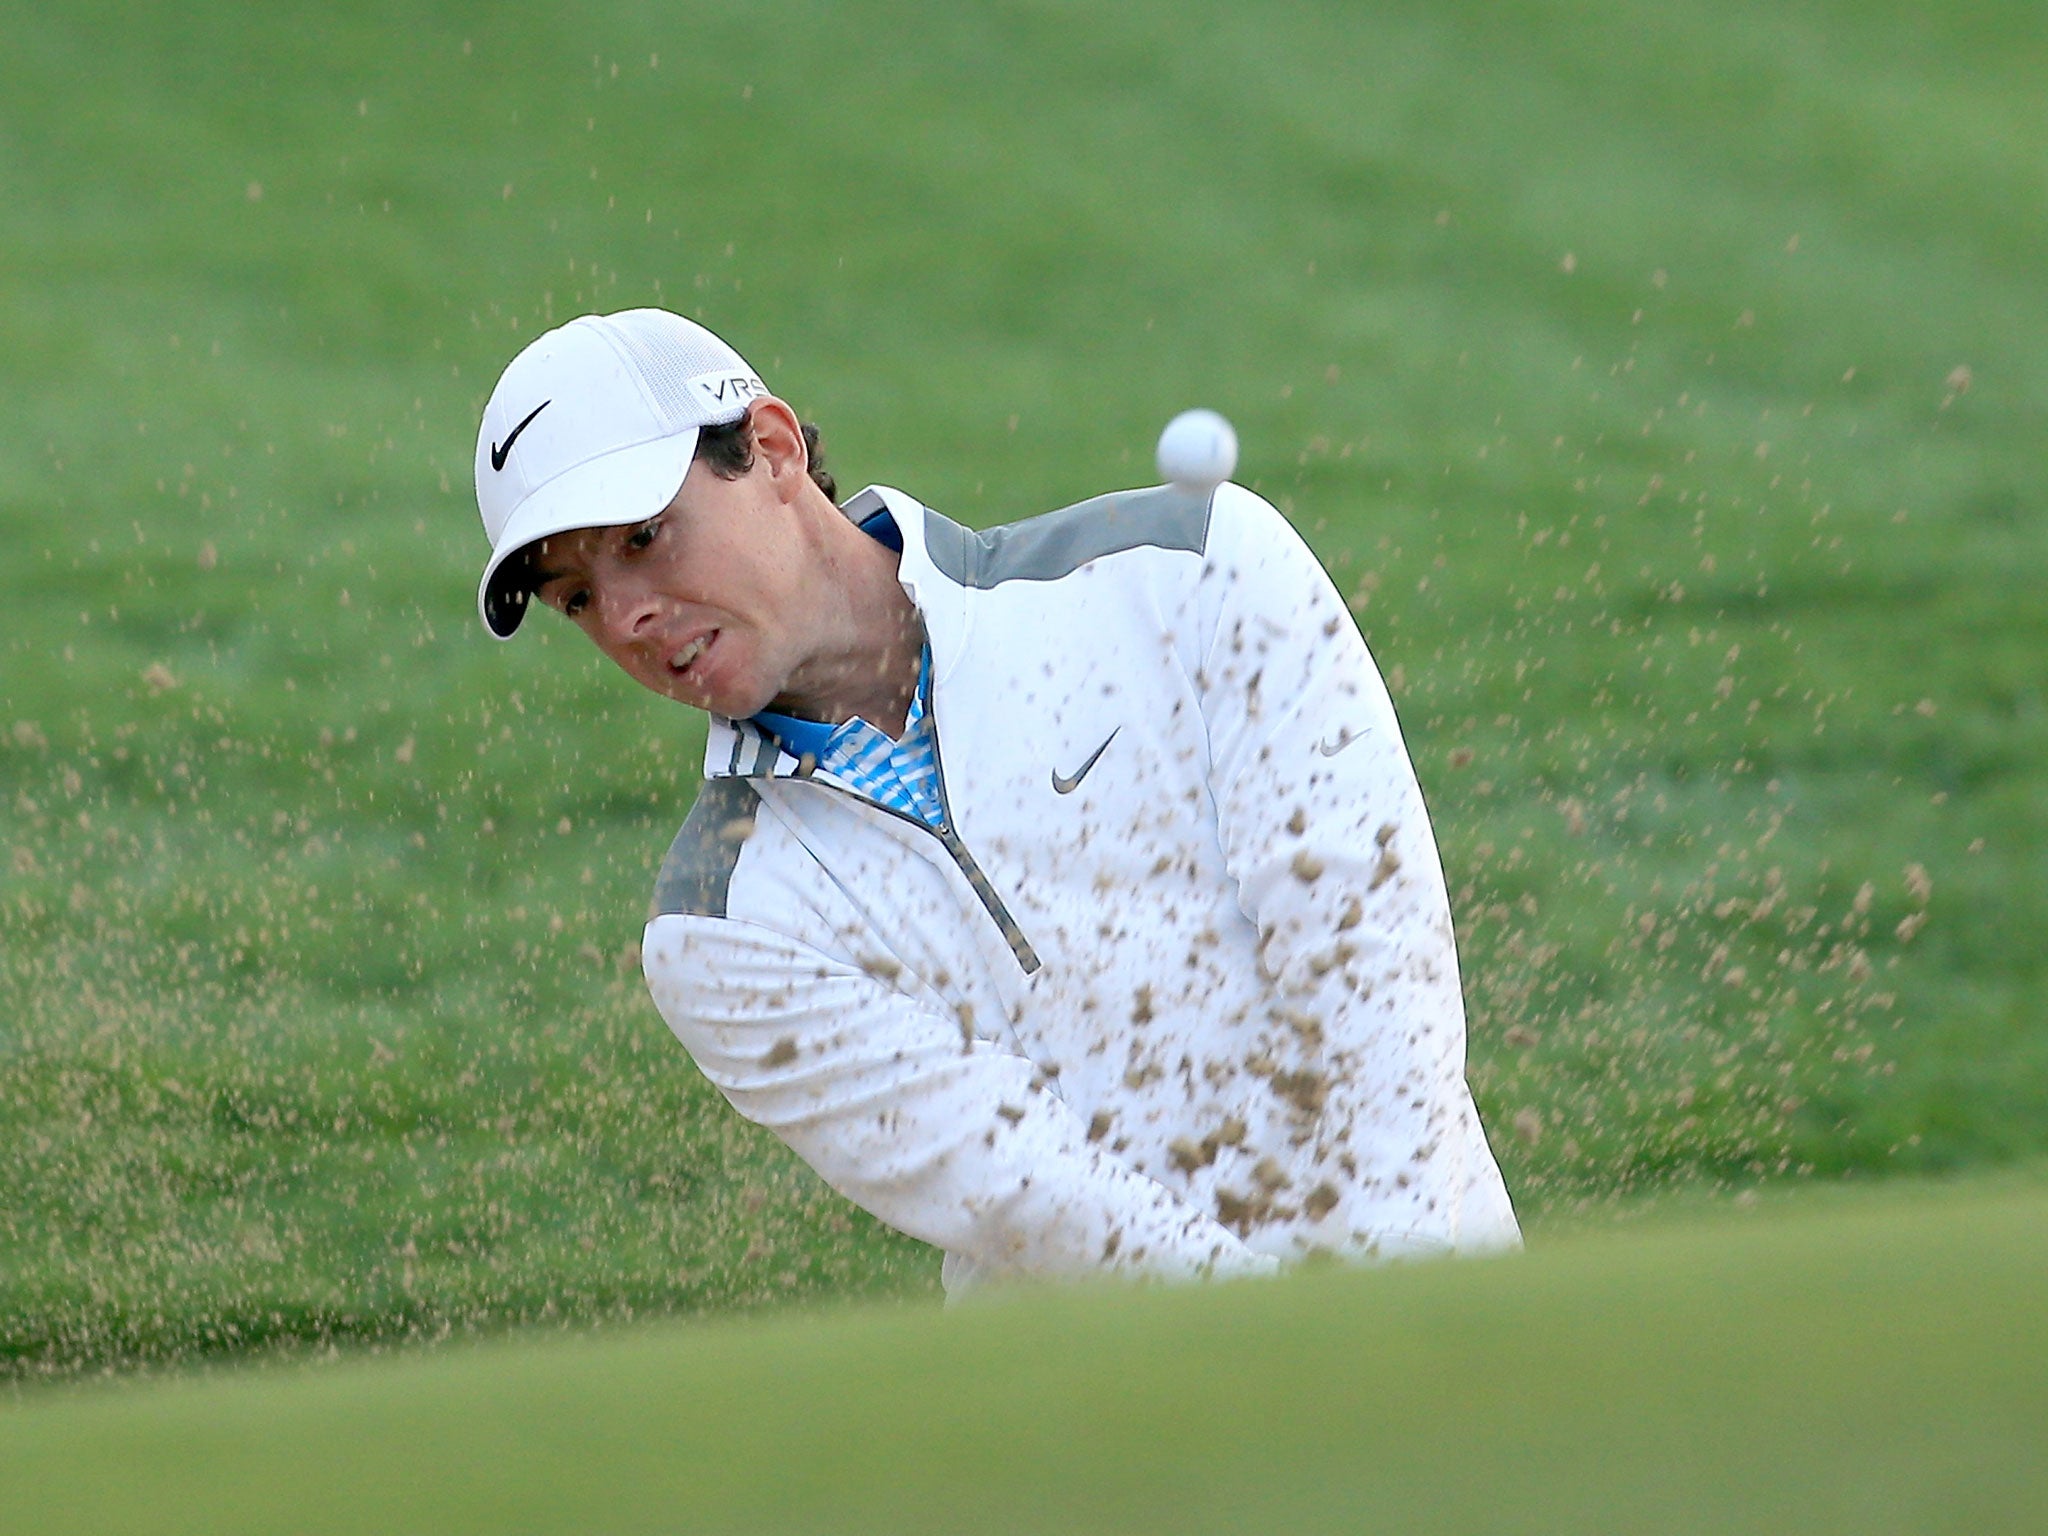 Rory McIlroy finished the first day in Abu Dhabi on two-under-par